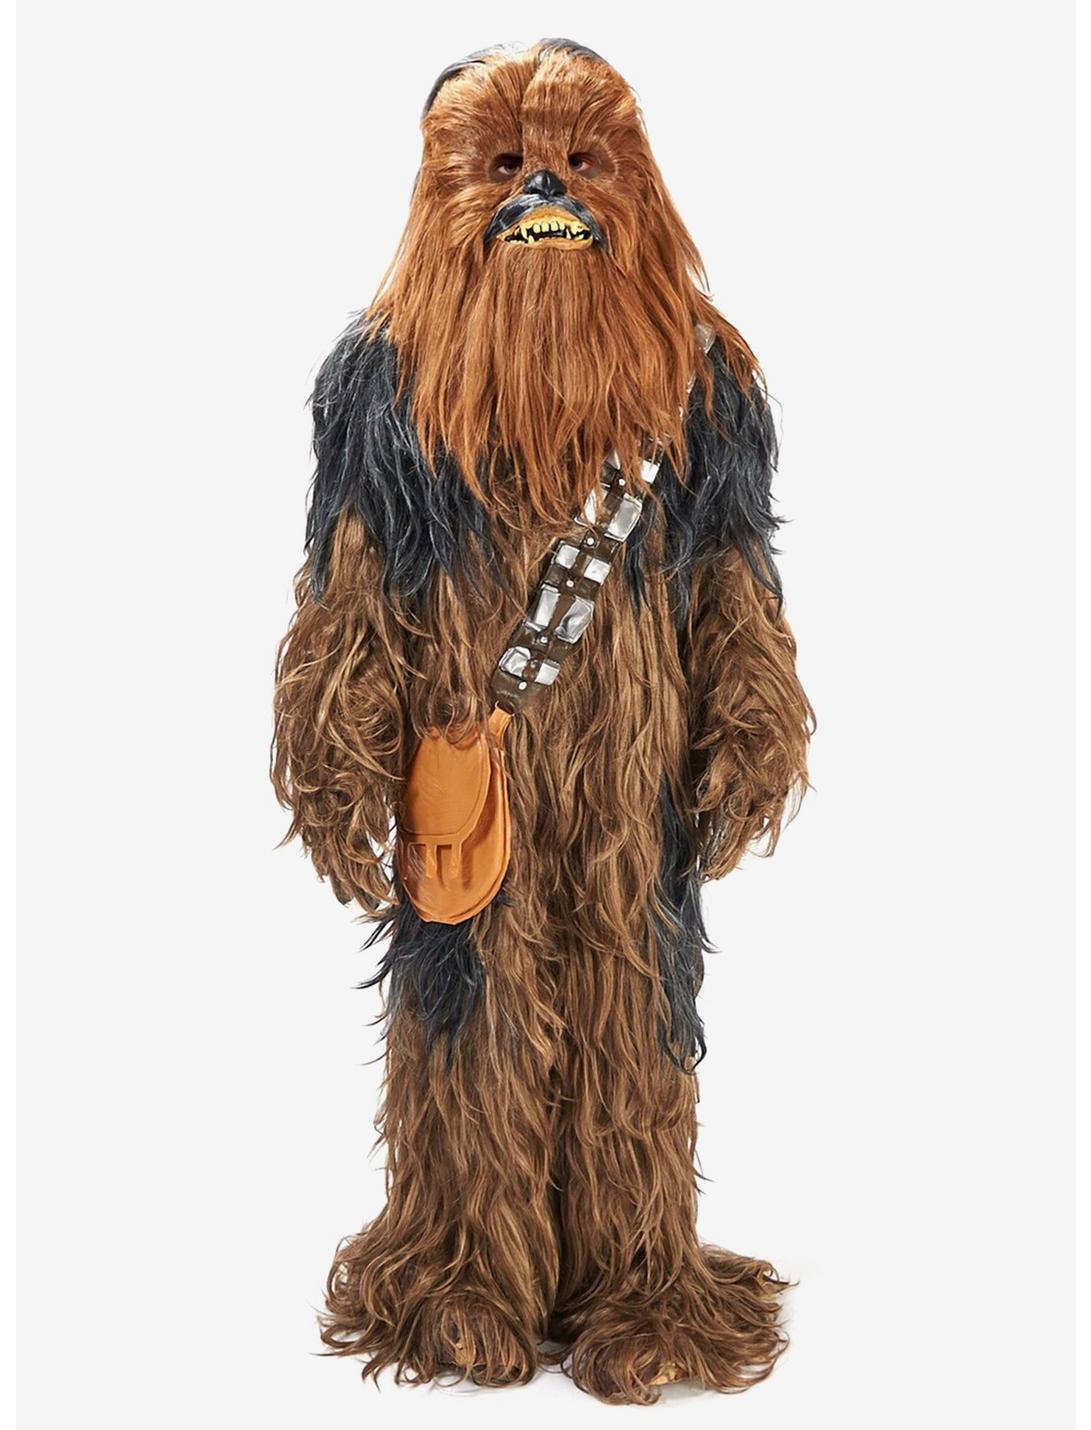 Star Wars Chewbacca Collector's Edition Standard, , hi-res